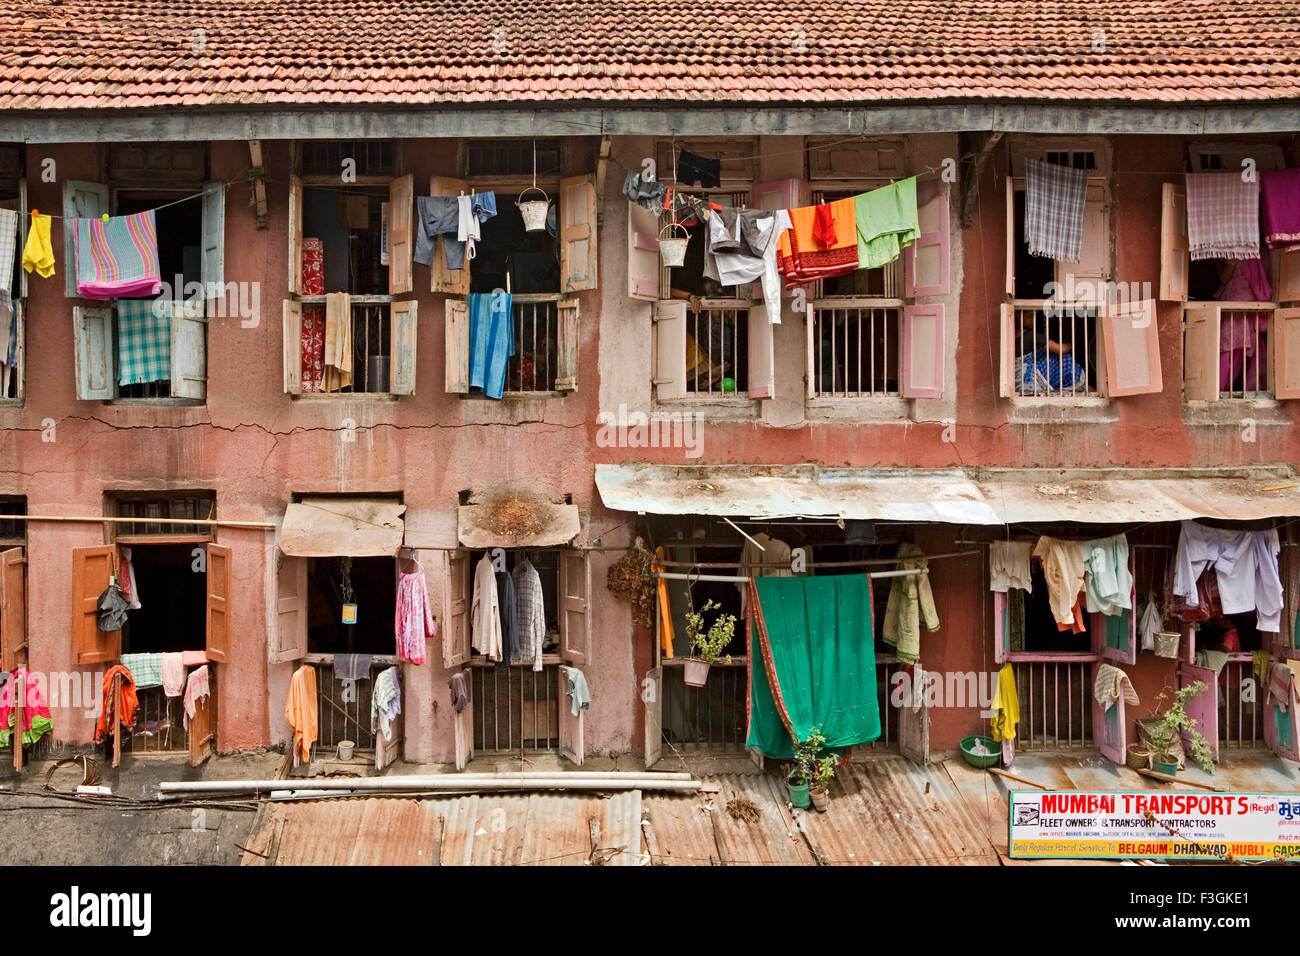 A 'chawl' ; single room housing complex with a common passage ; with shops on the ground floor ; Mumbai Bombay ; Maharashtra Stock Photo